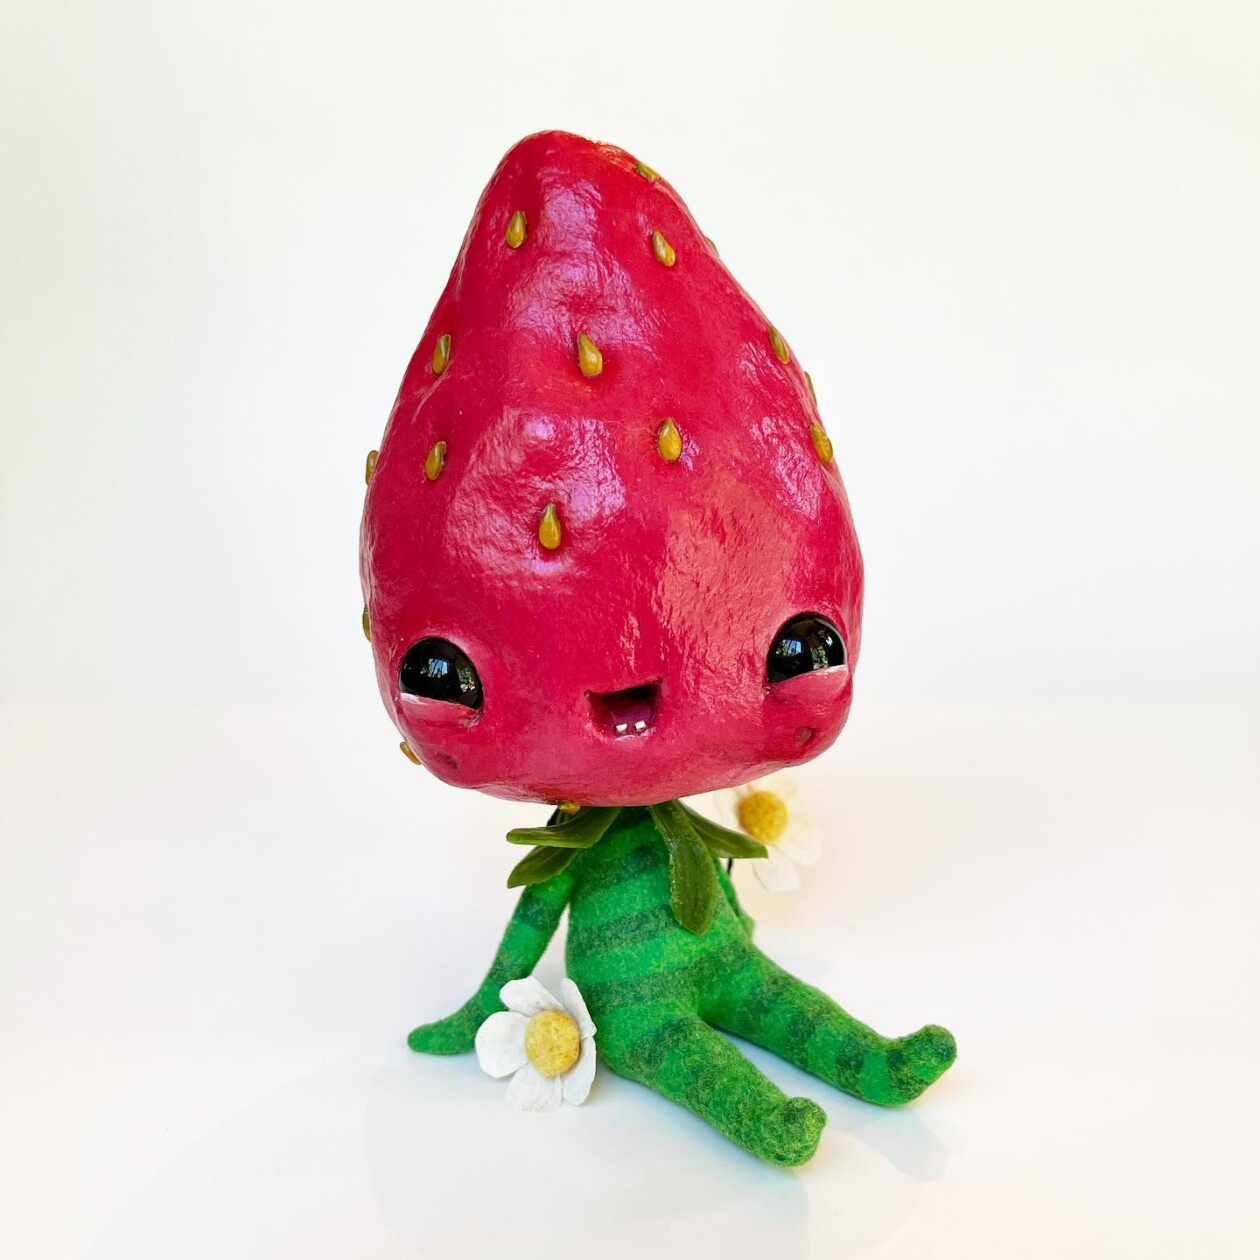 Cute And Creepy Little Monster Toys By Sara Duarte (21)